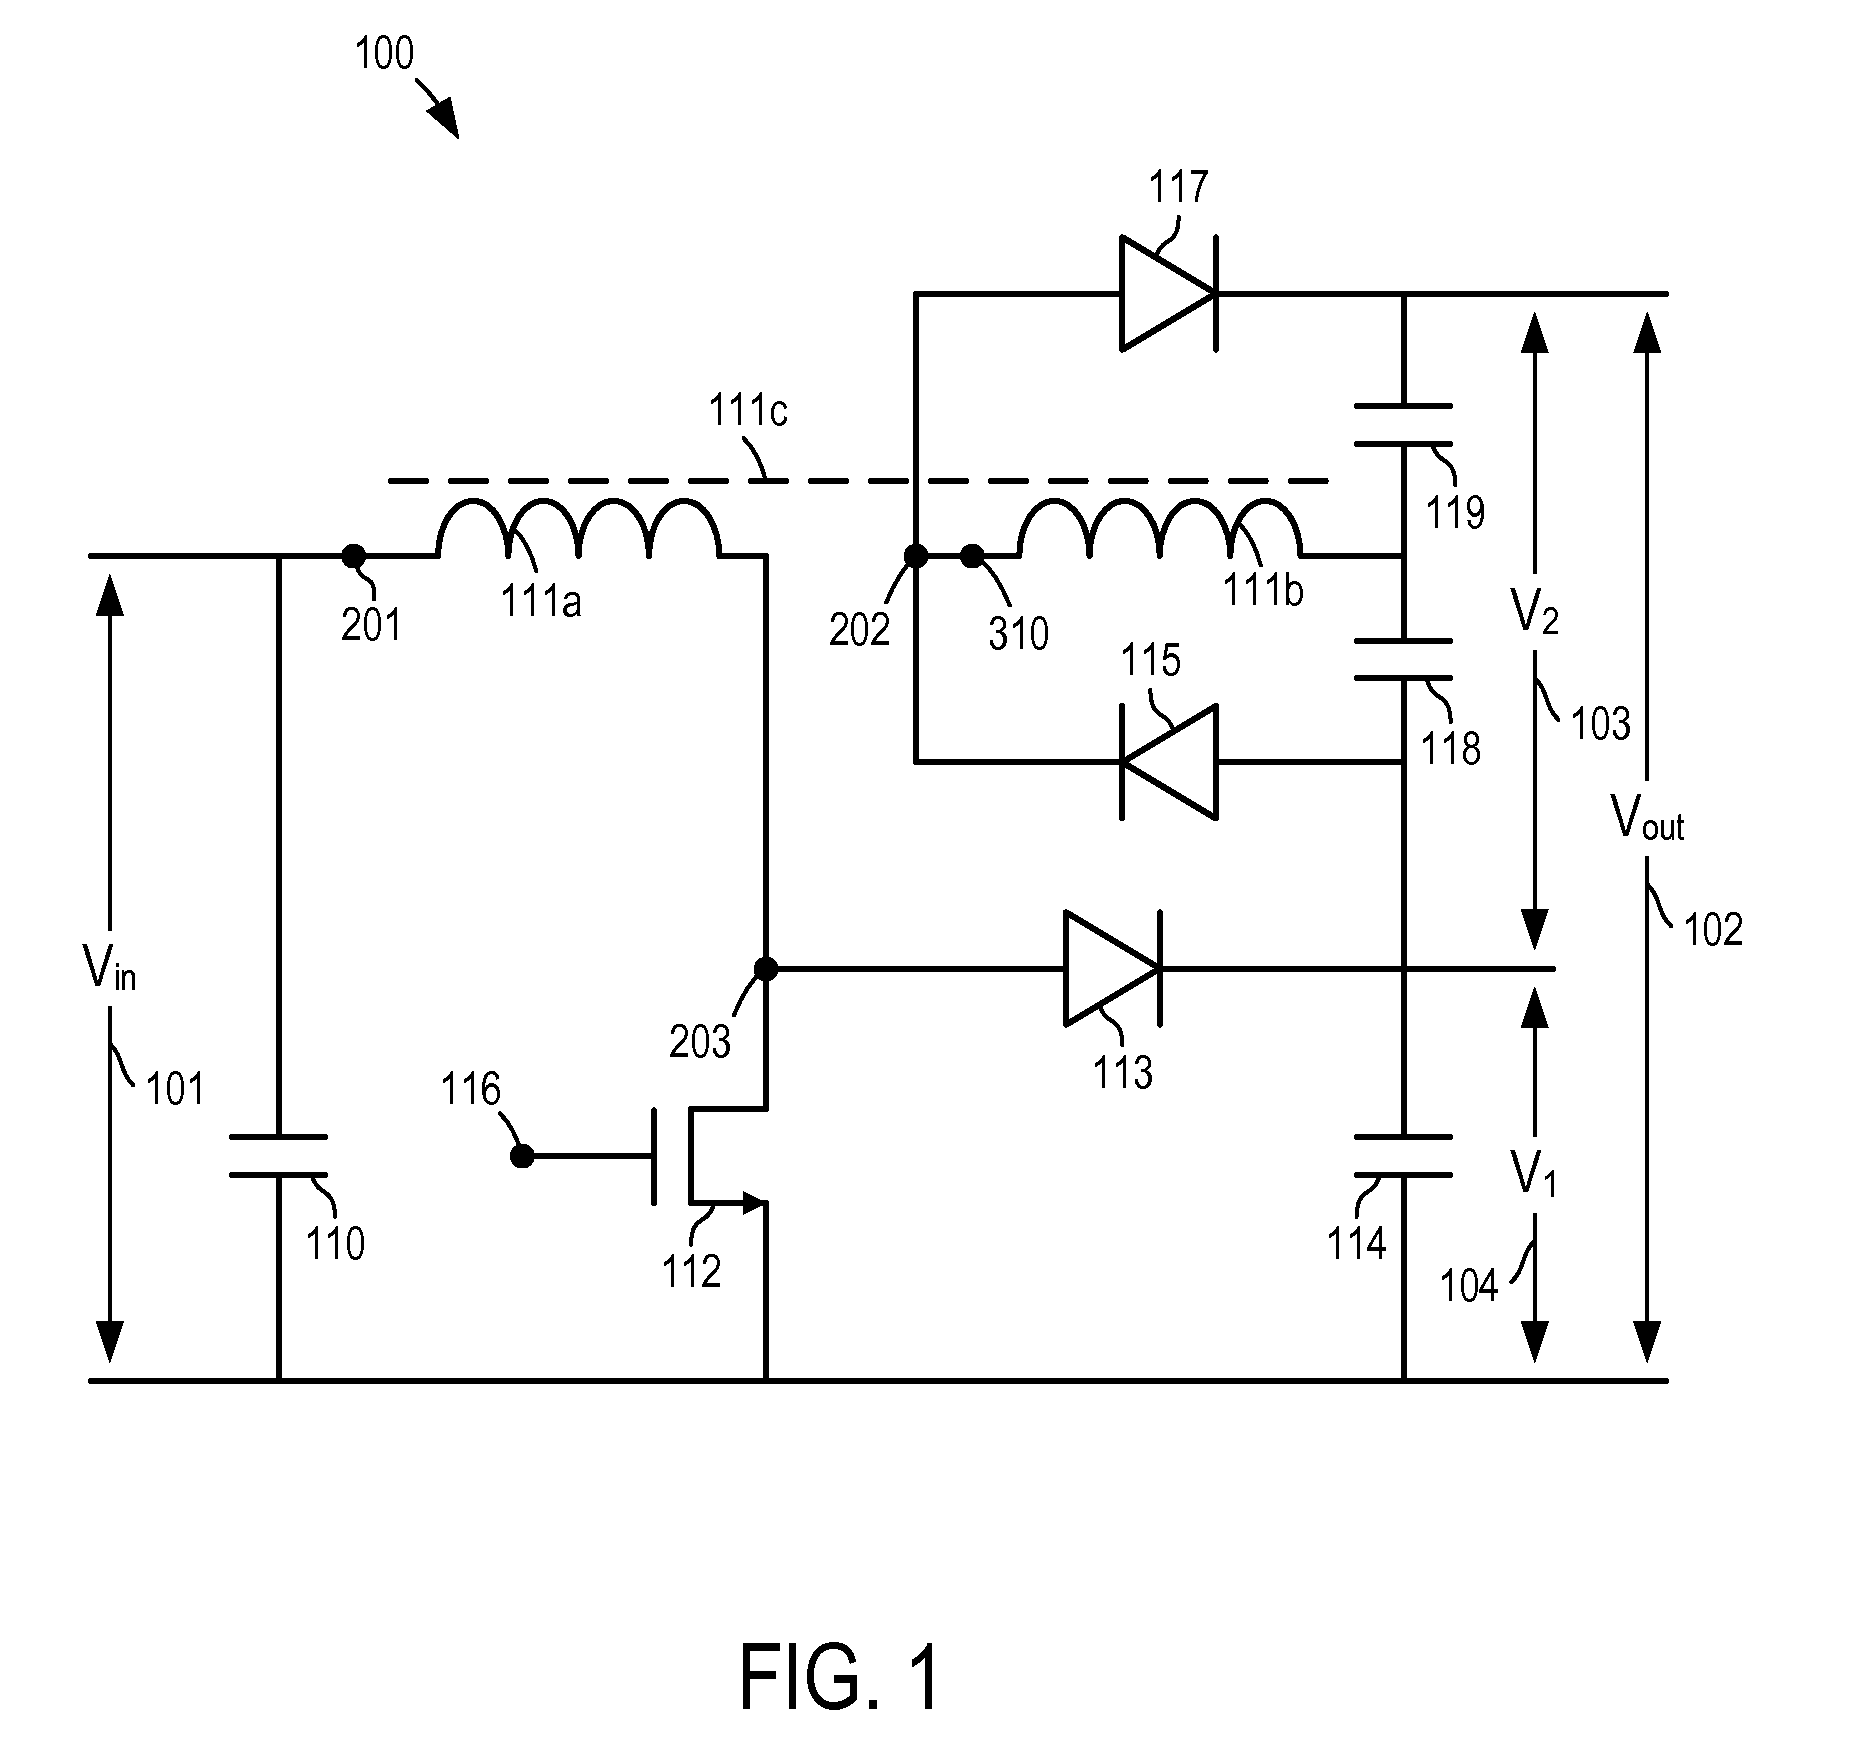 Systems to Connect Multiple Direct Current Energy Sources to an Alternating Current System